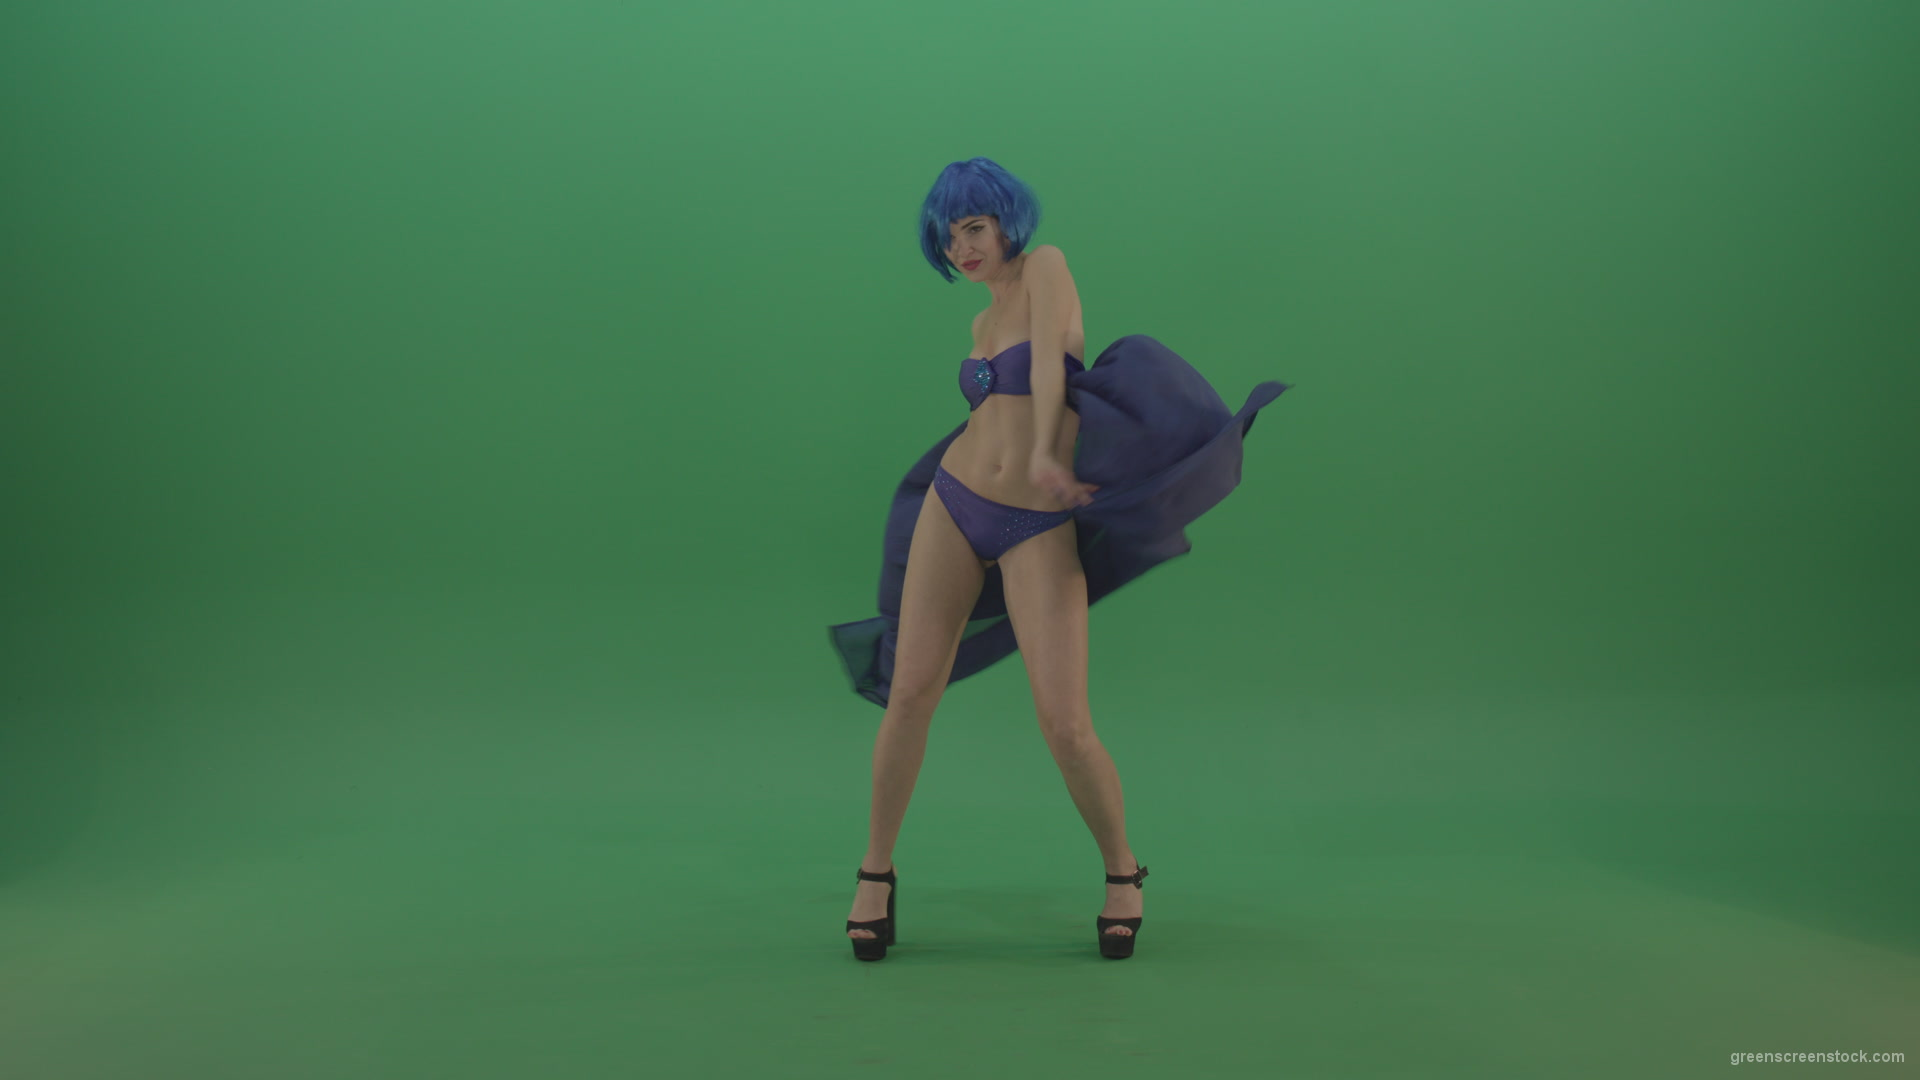 Full-size-erotic-young-girl-dancing-go-go-with-blue-dress-curtain-on-green-screen_005 Green Screen Stock